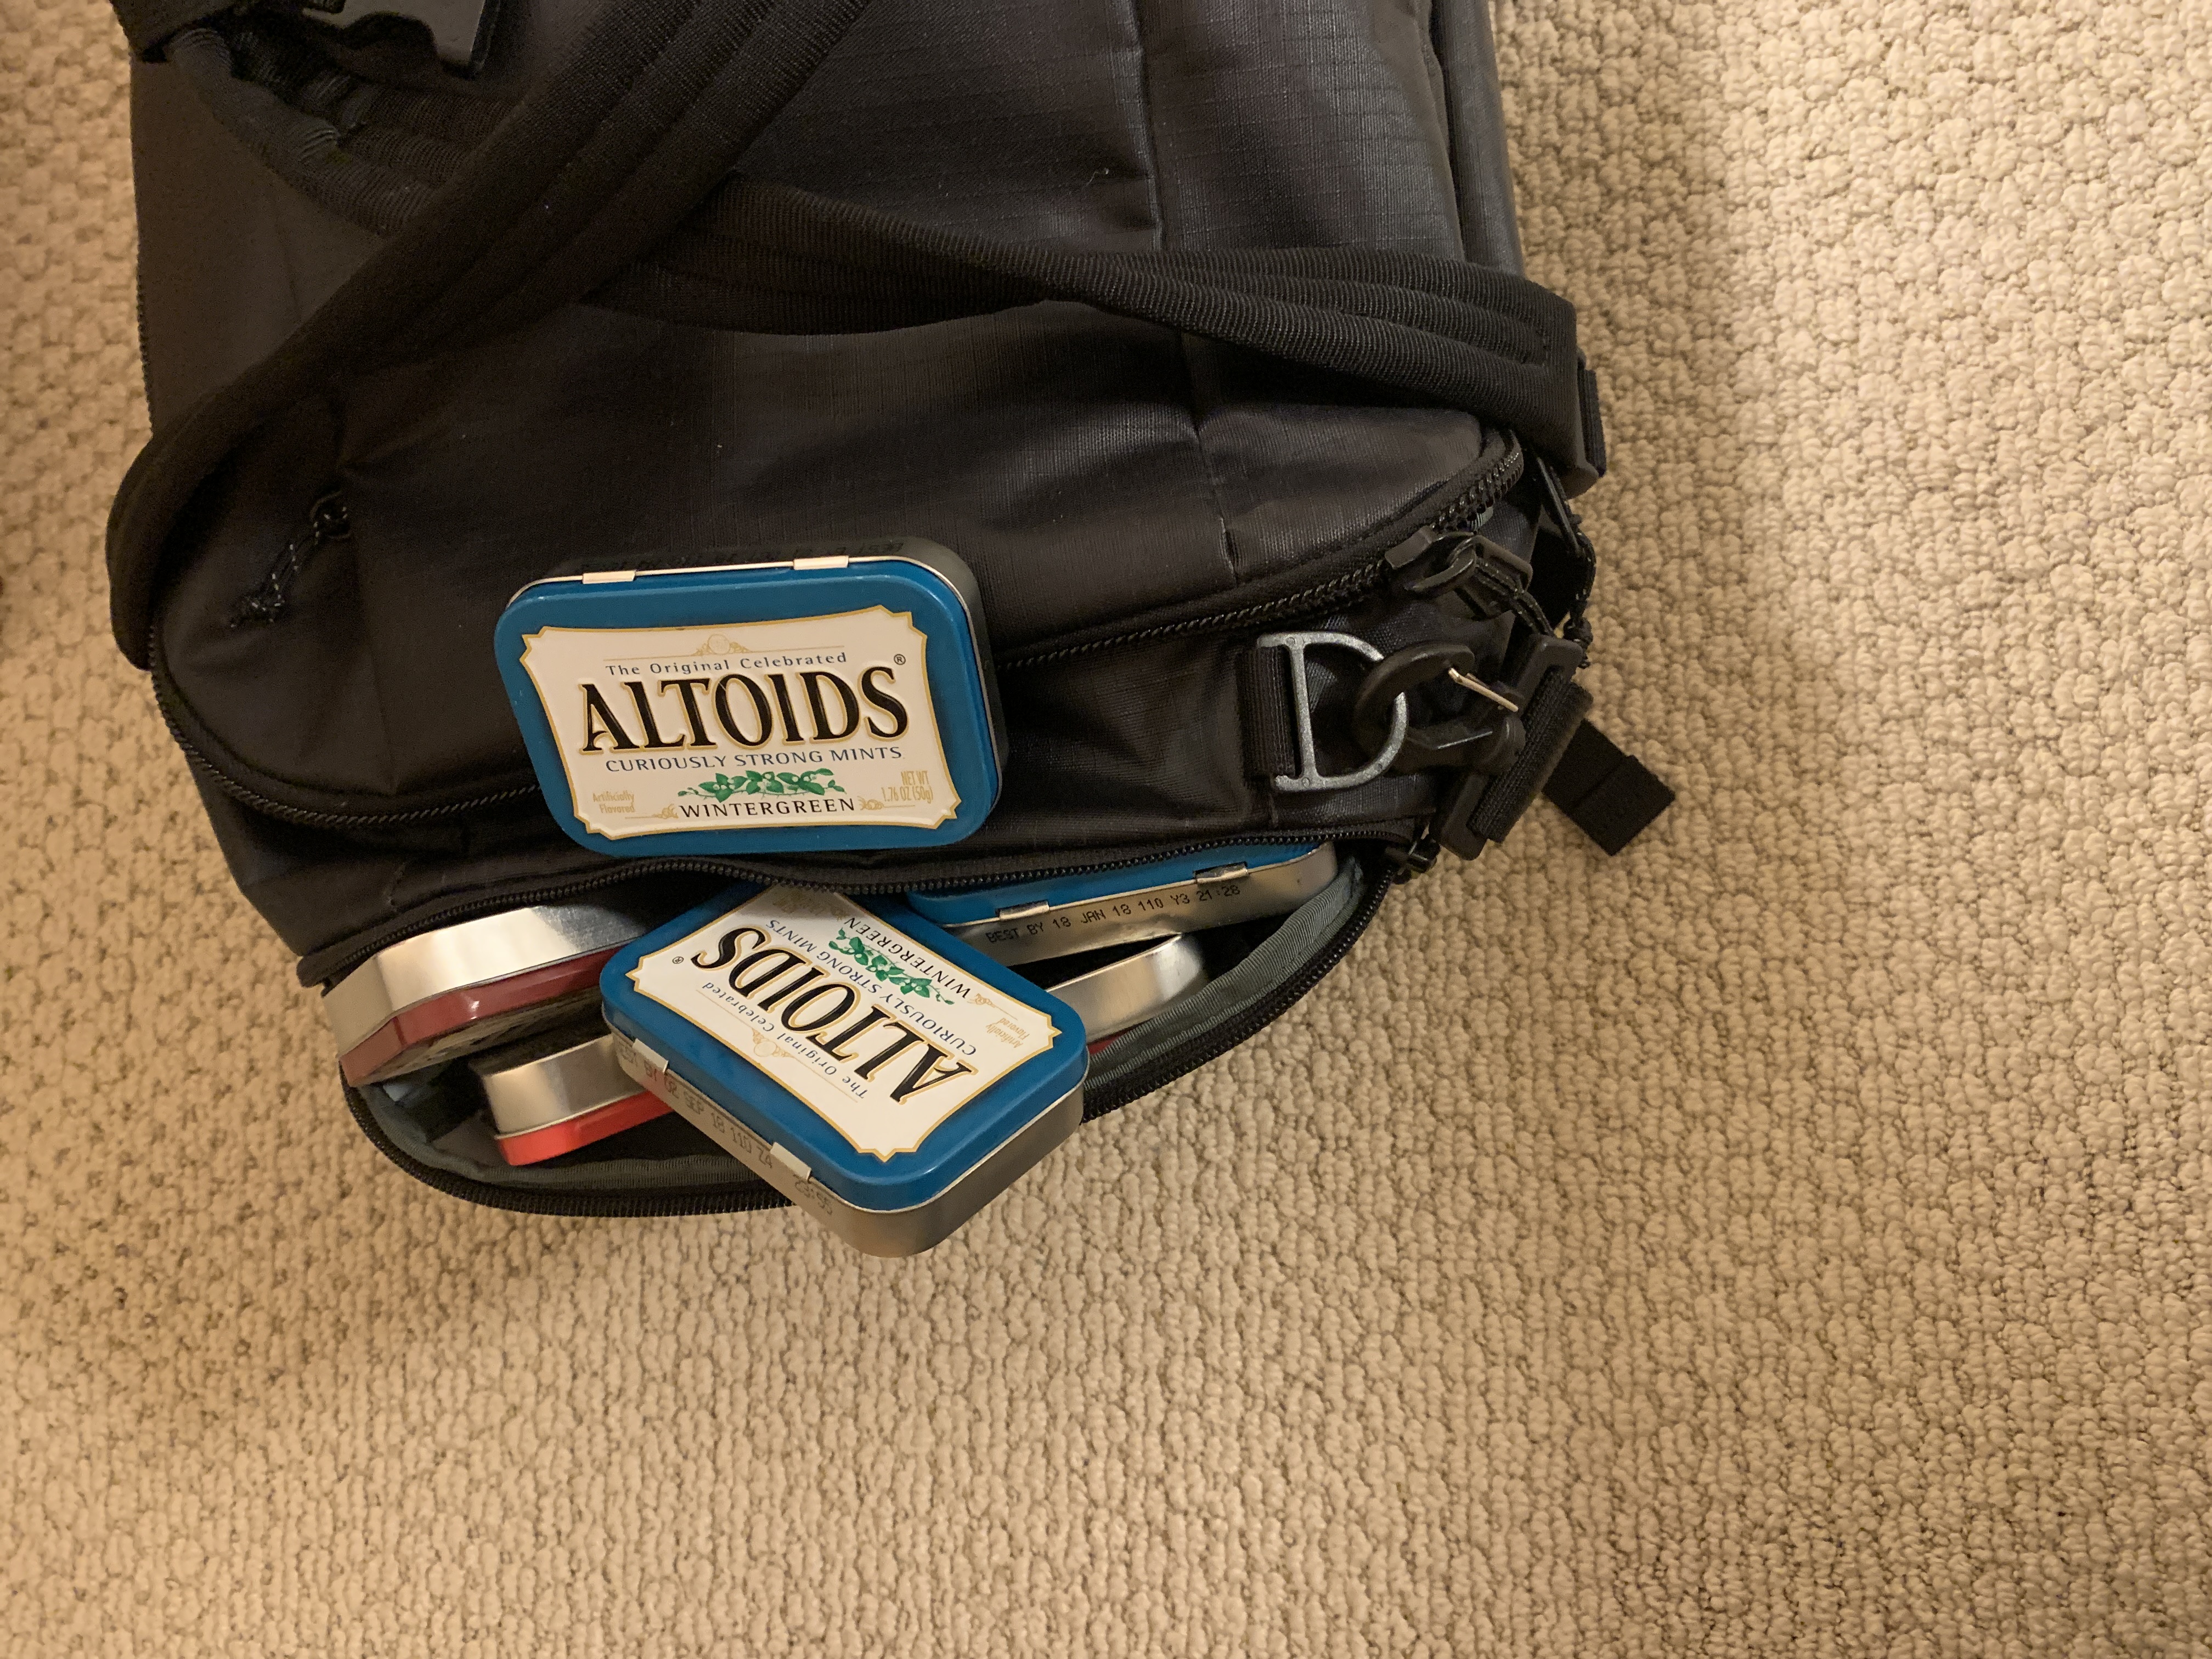 A picture of Altoids tins spilling out of the side pocket of a duffel bag.